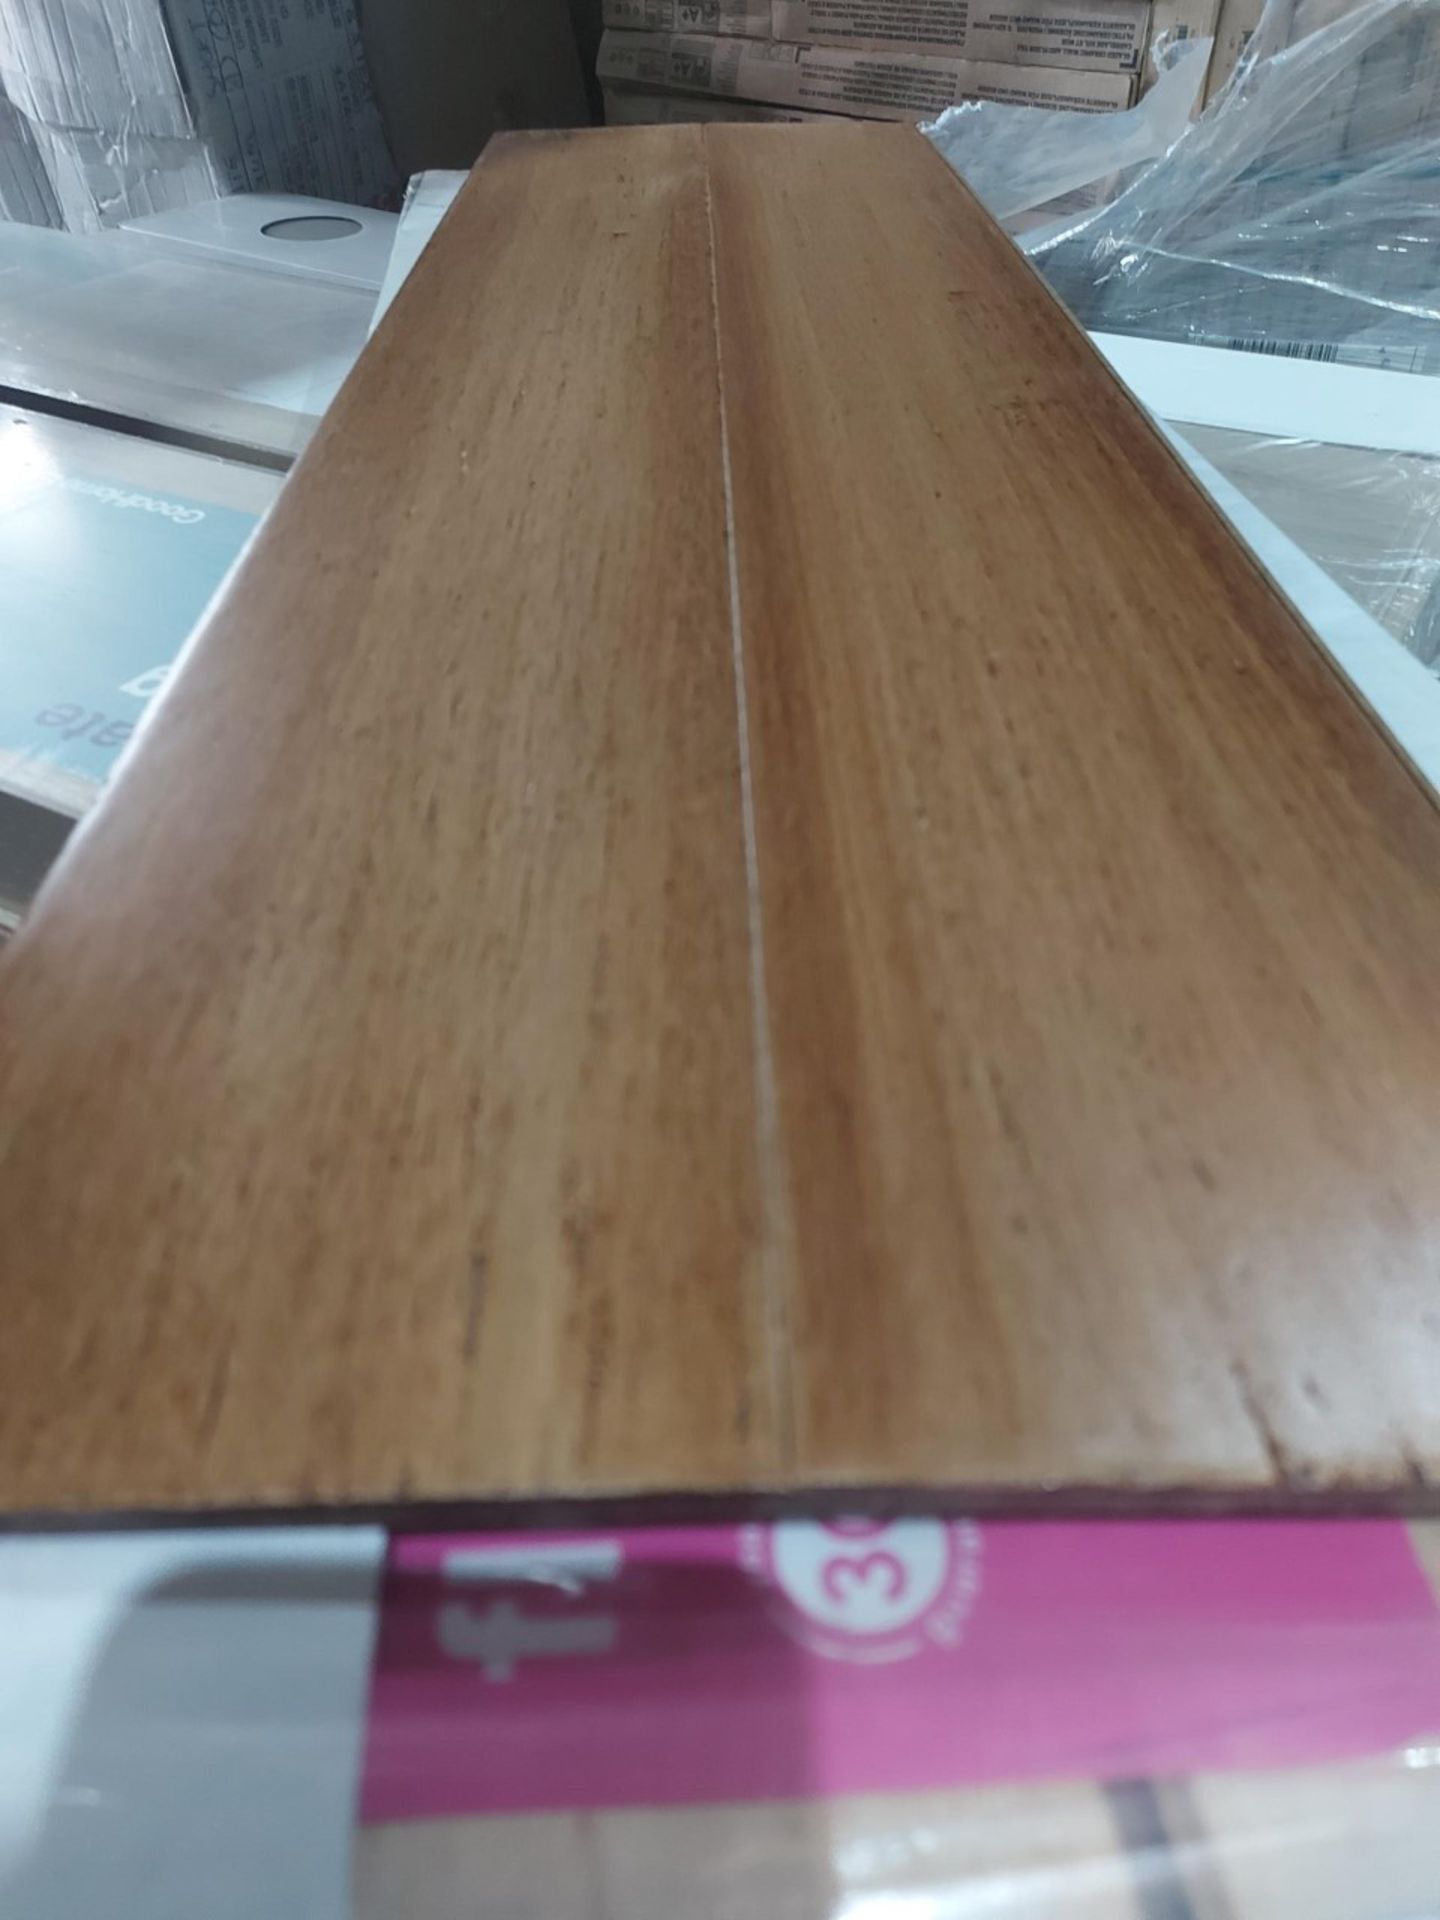 NEW PACKAGED 5.01m2 OF PATTAYA BAMBOO TOP LAYER FLOORING. VARNISHED. SUITABLE FOR UNDERFLOOR - Image 4 of 4